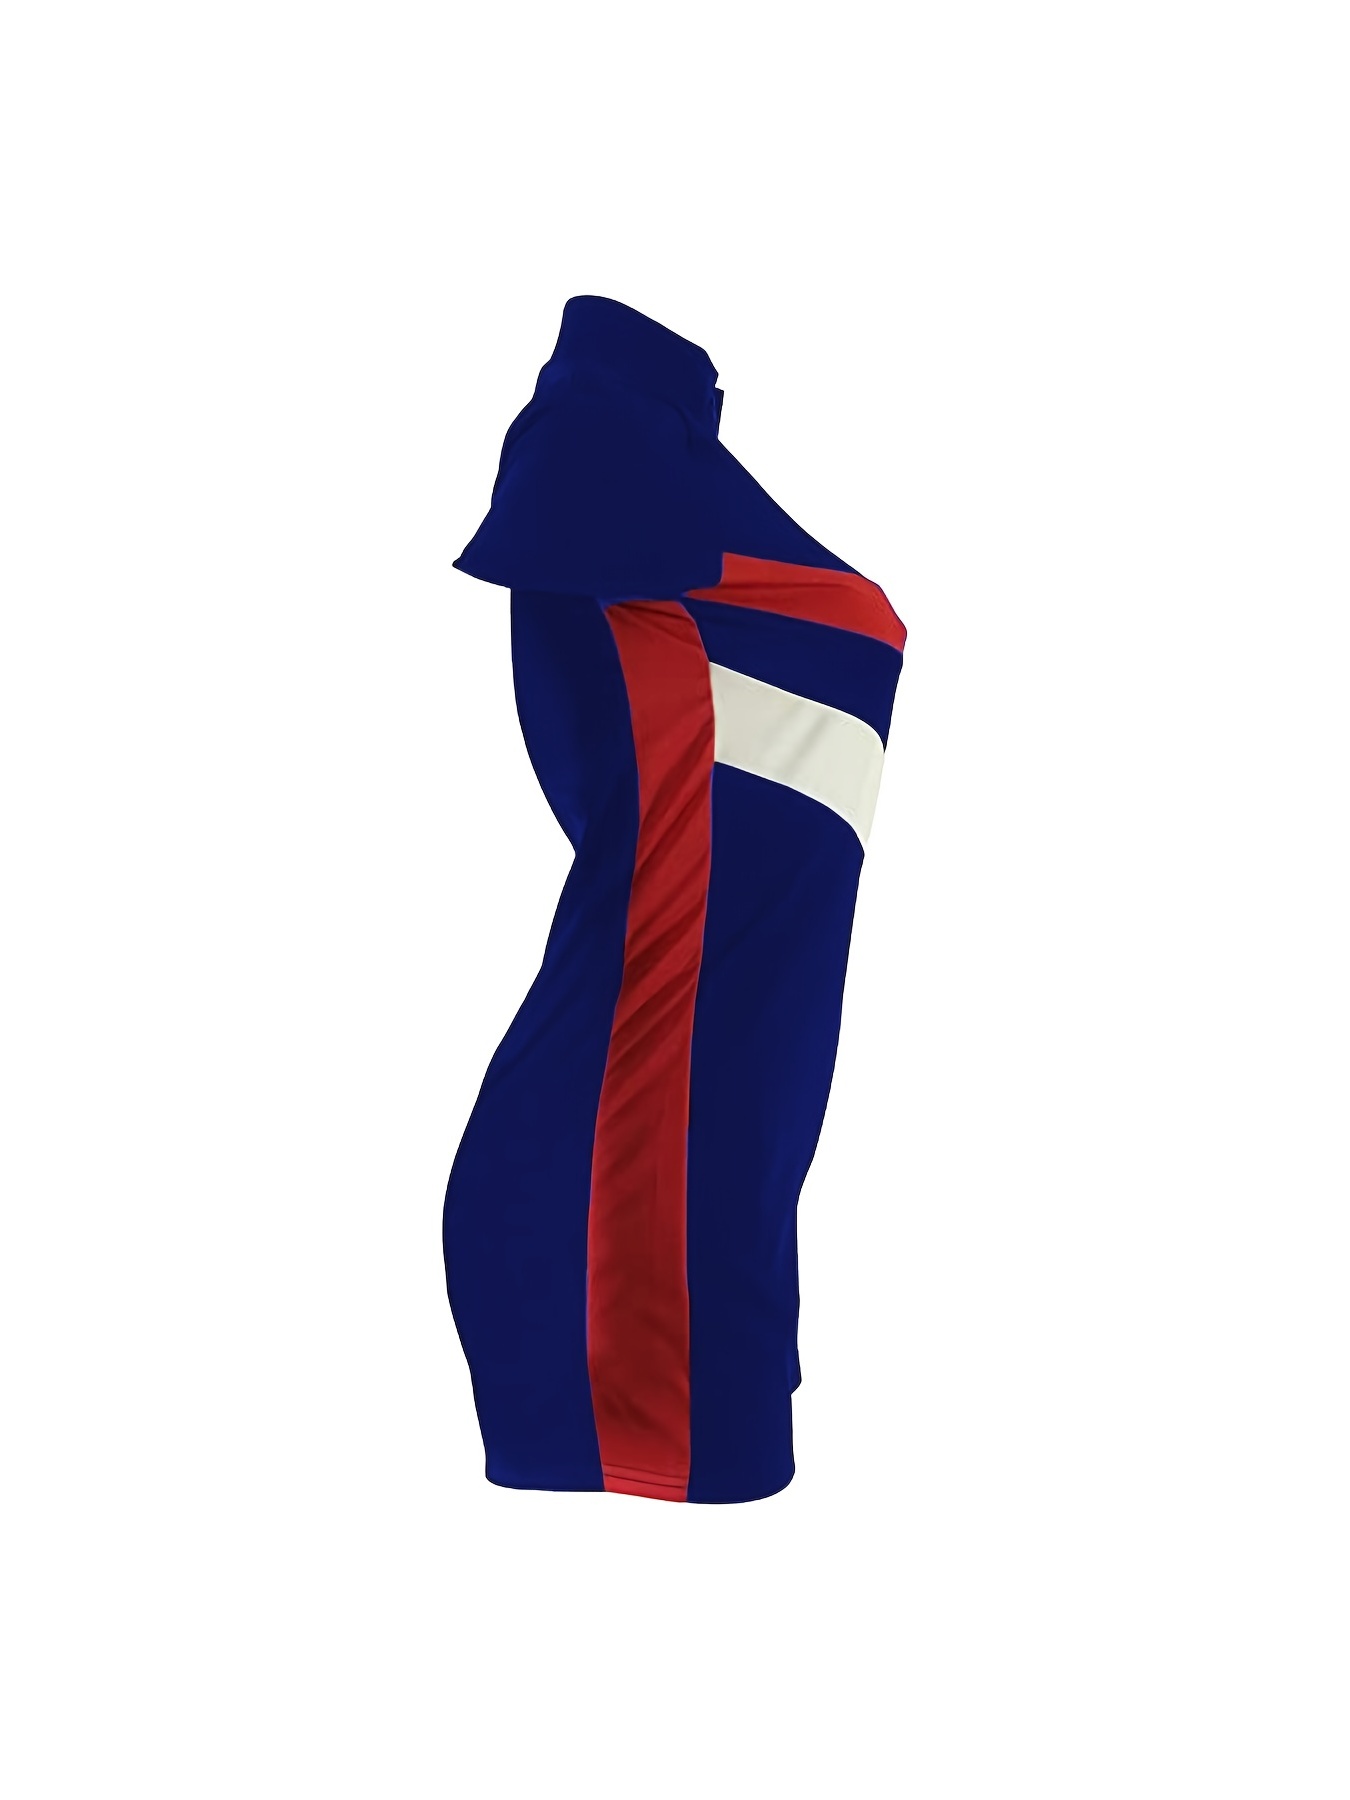 Color-blocked Zip-Off Jumpsuit - Ready to Wear